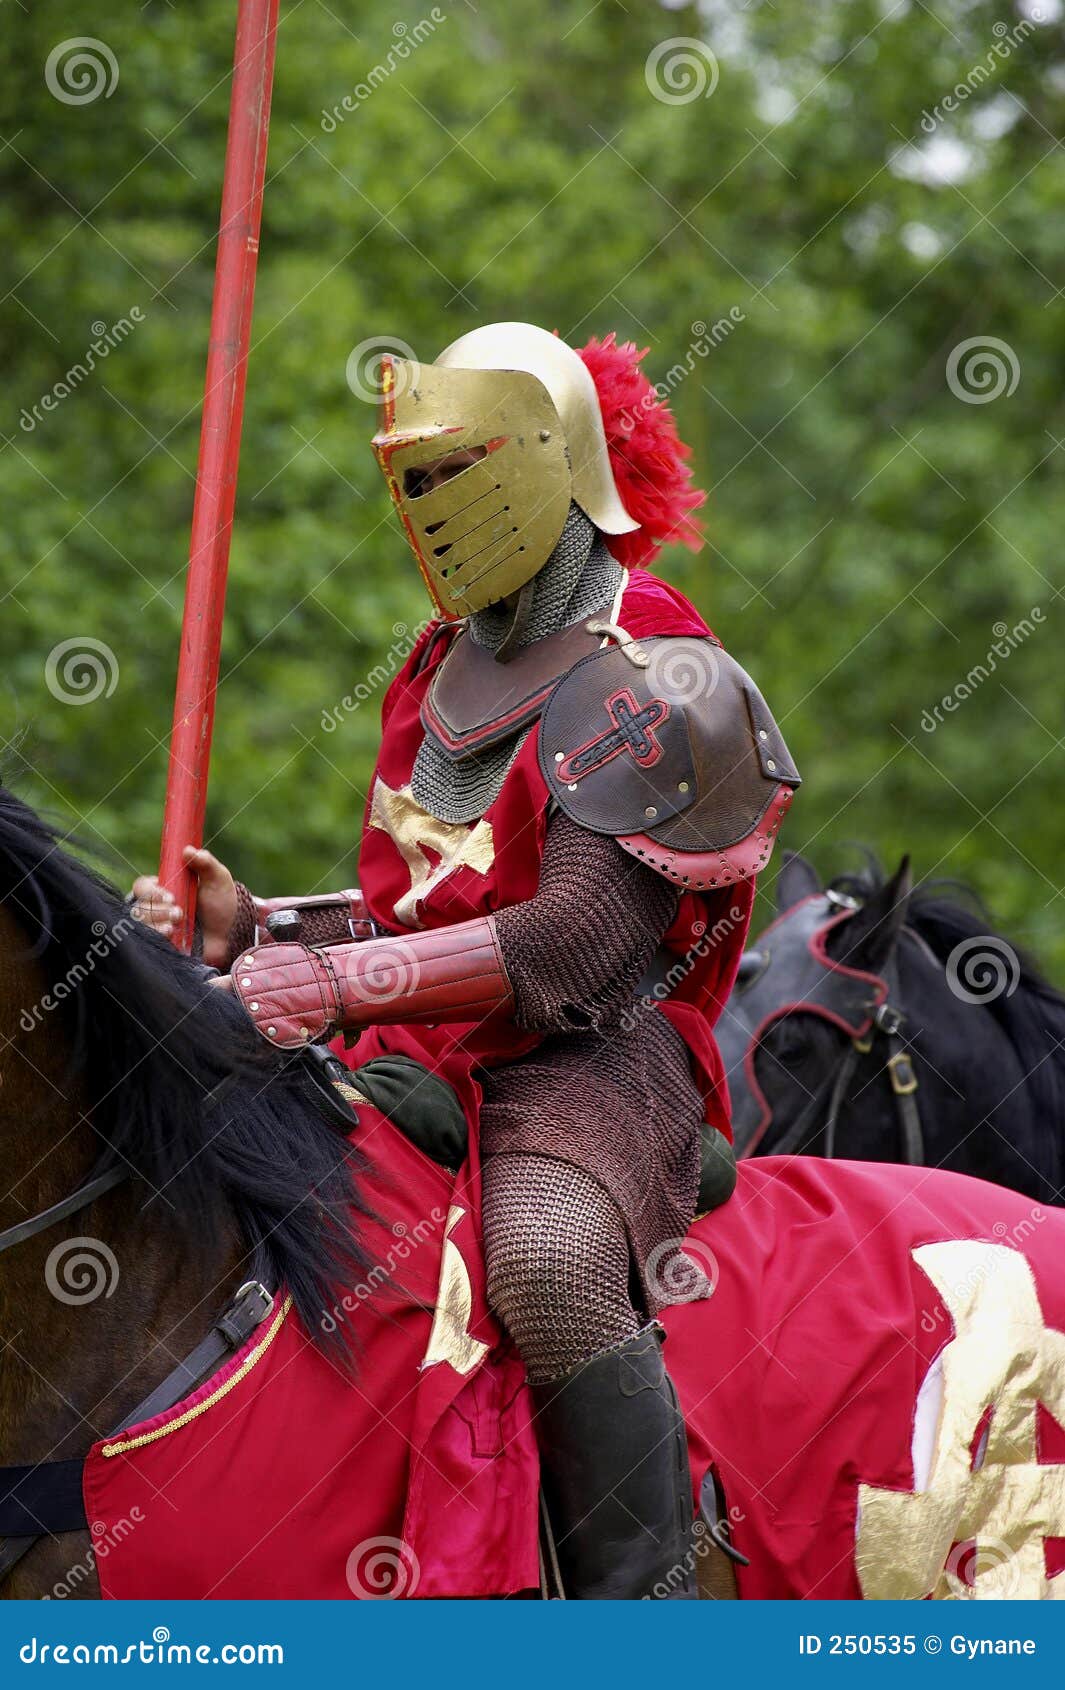 red knight